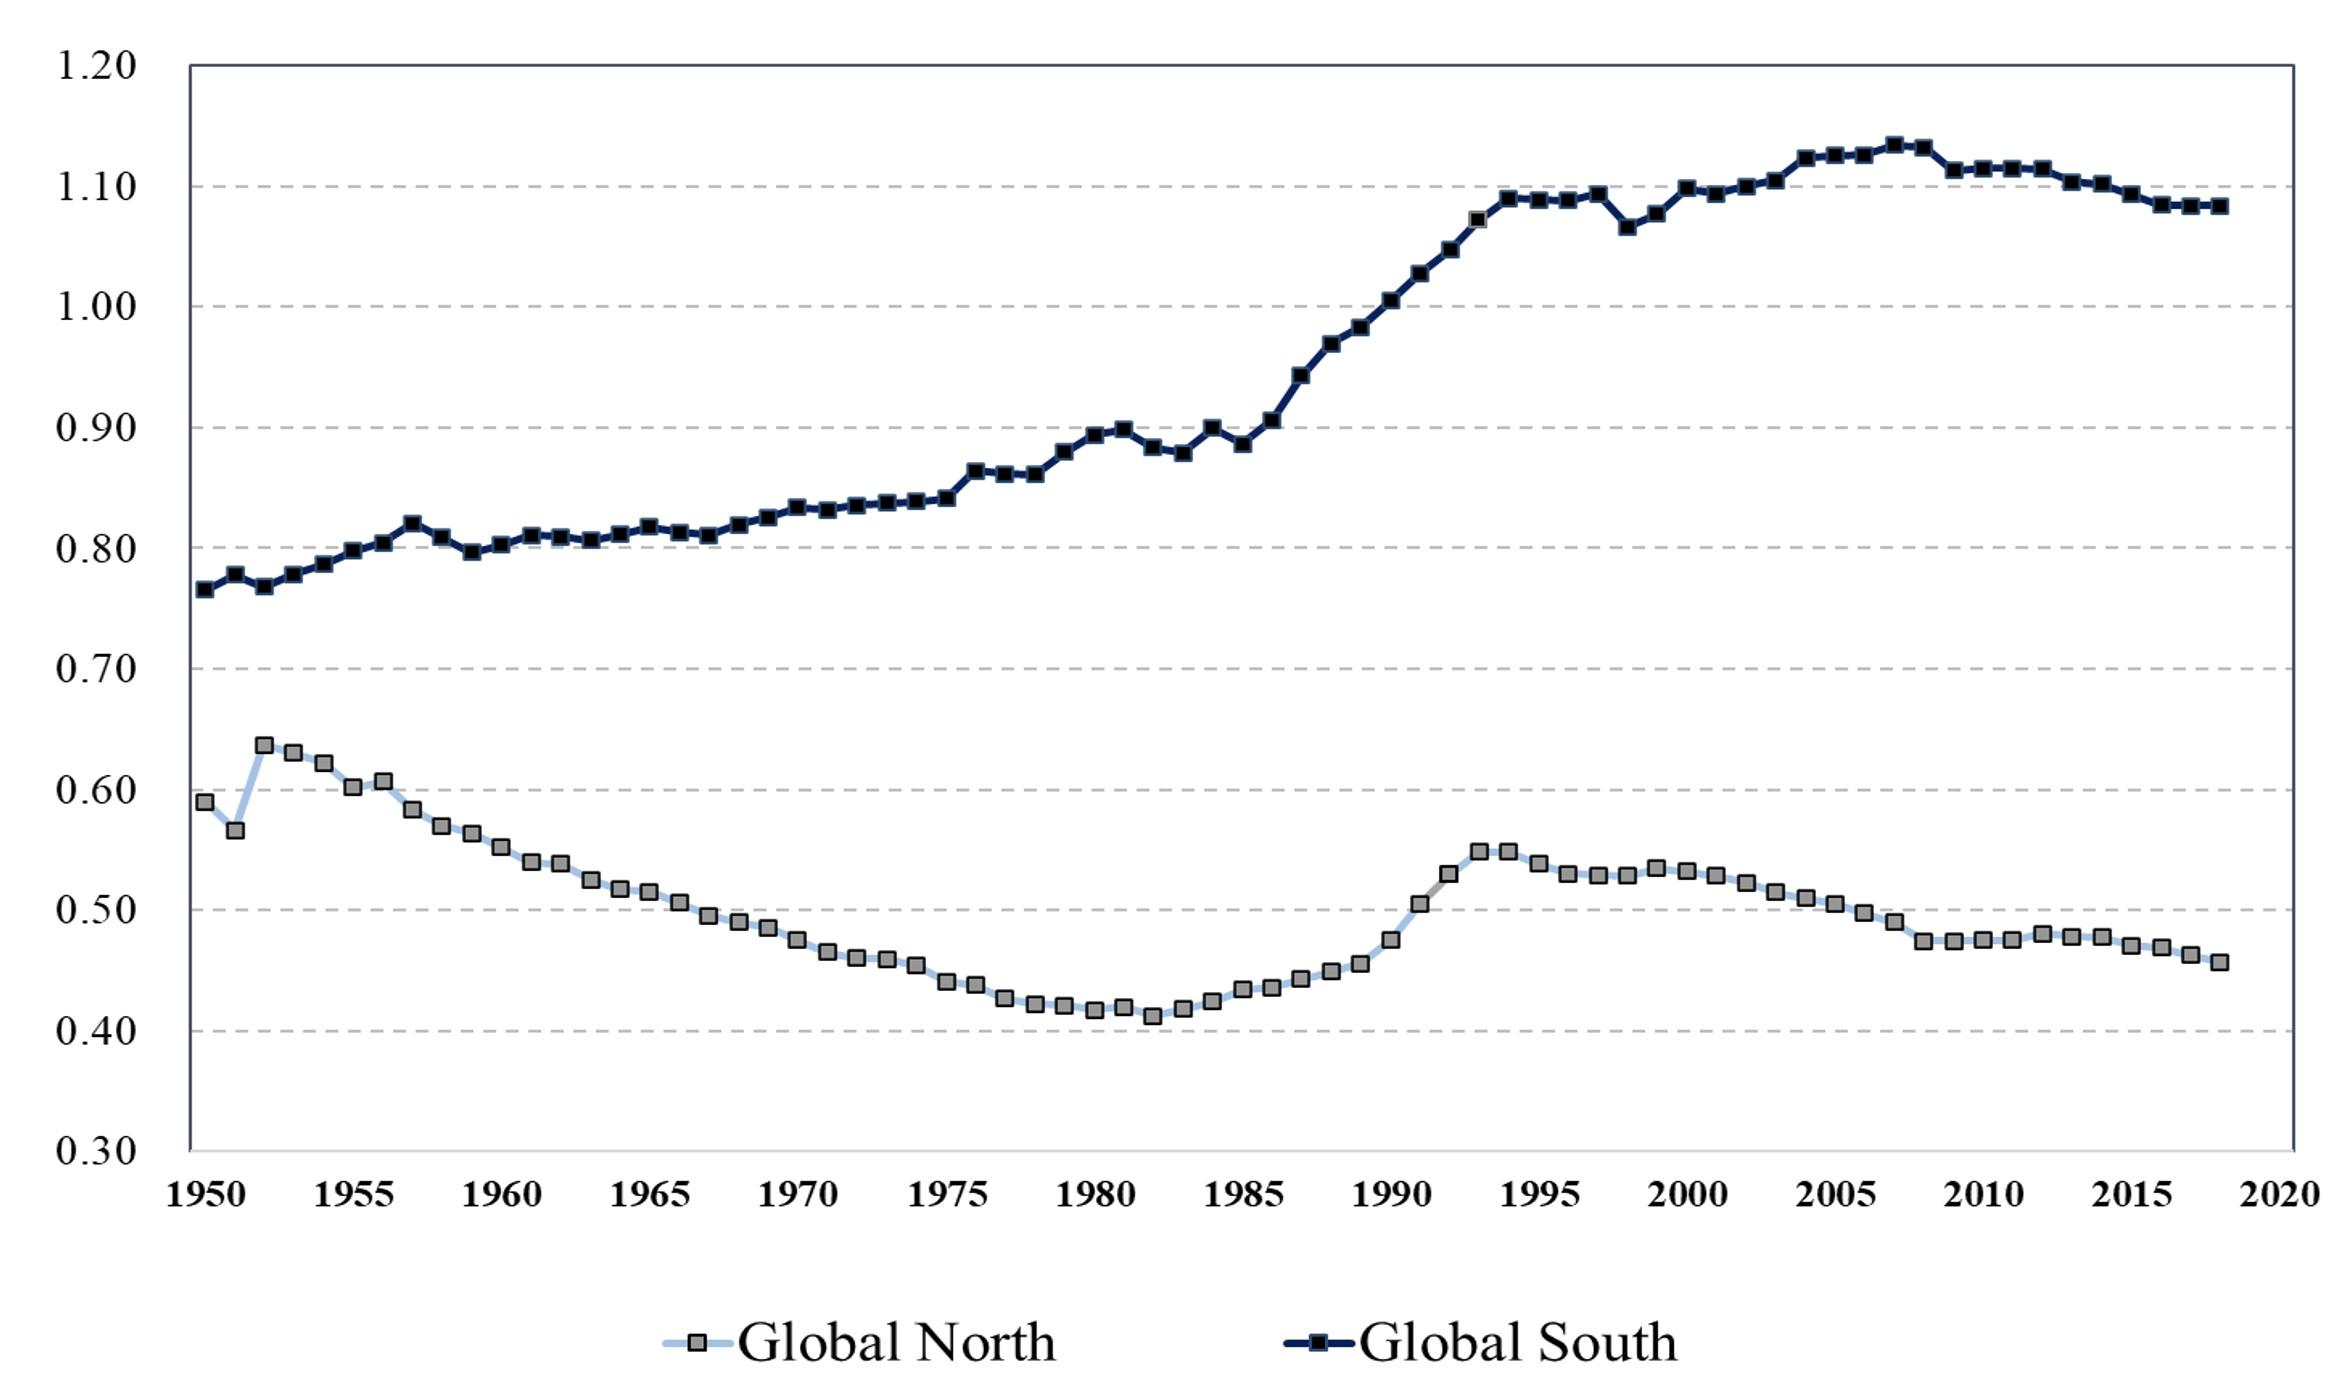 Figure 1 Coefficient of variation of per capita GDP in the Global North and Global South, 1950-2018